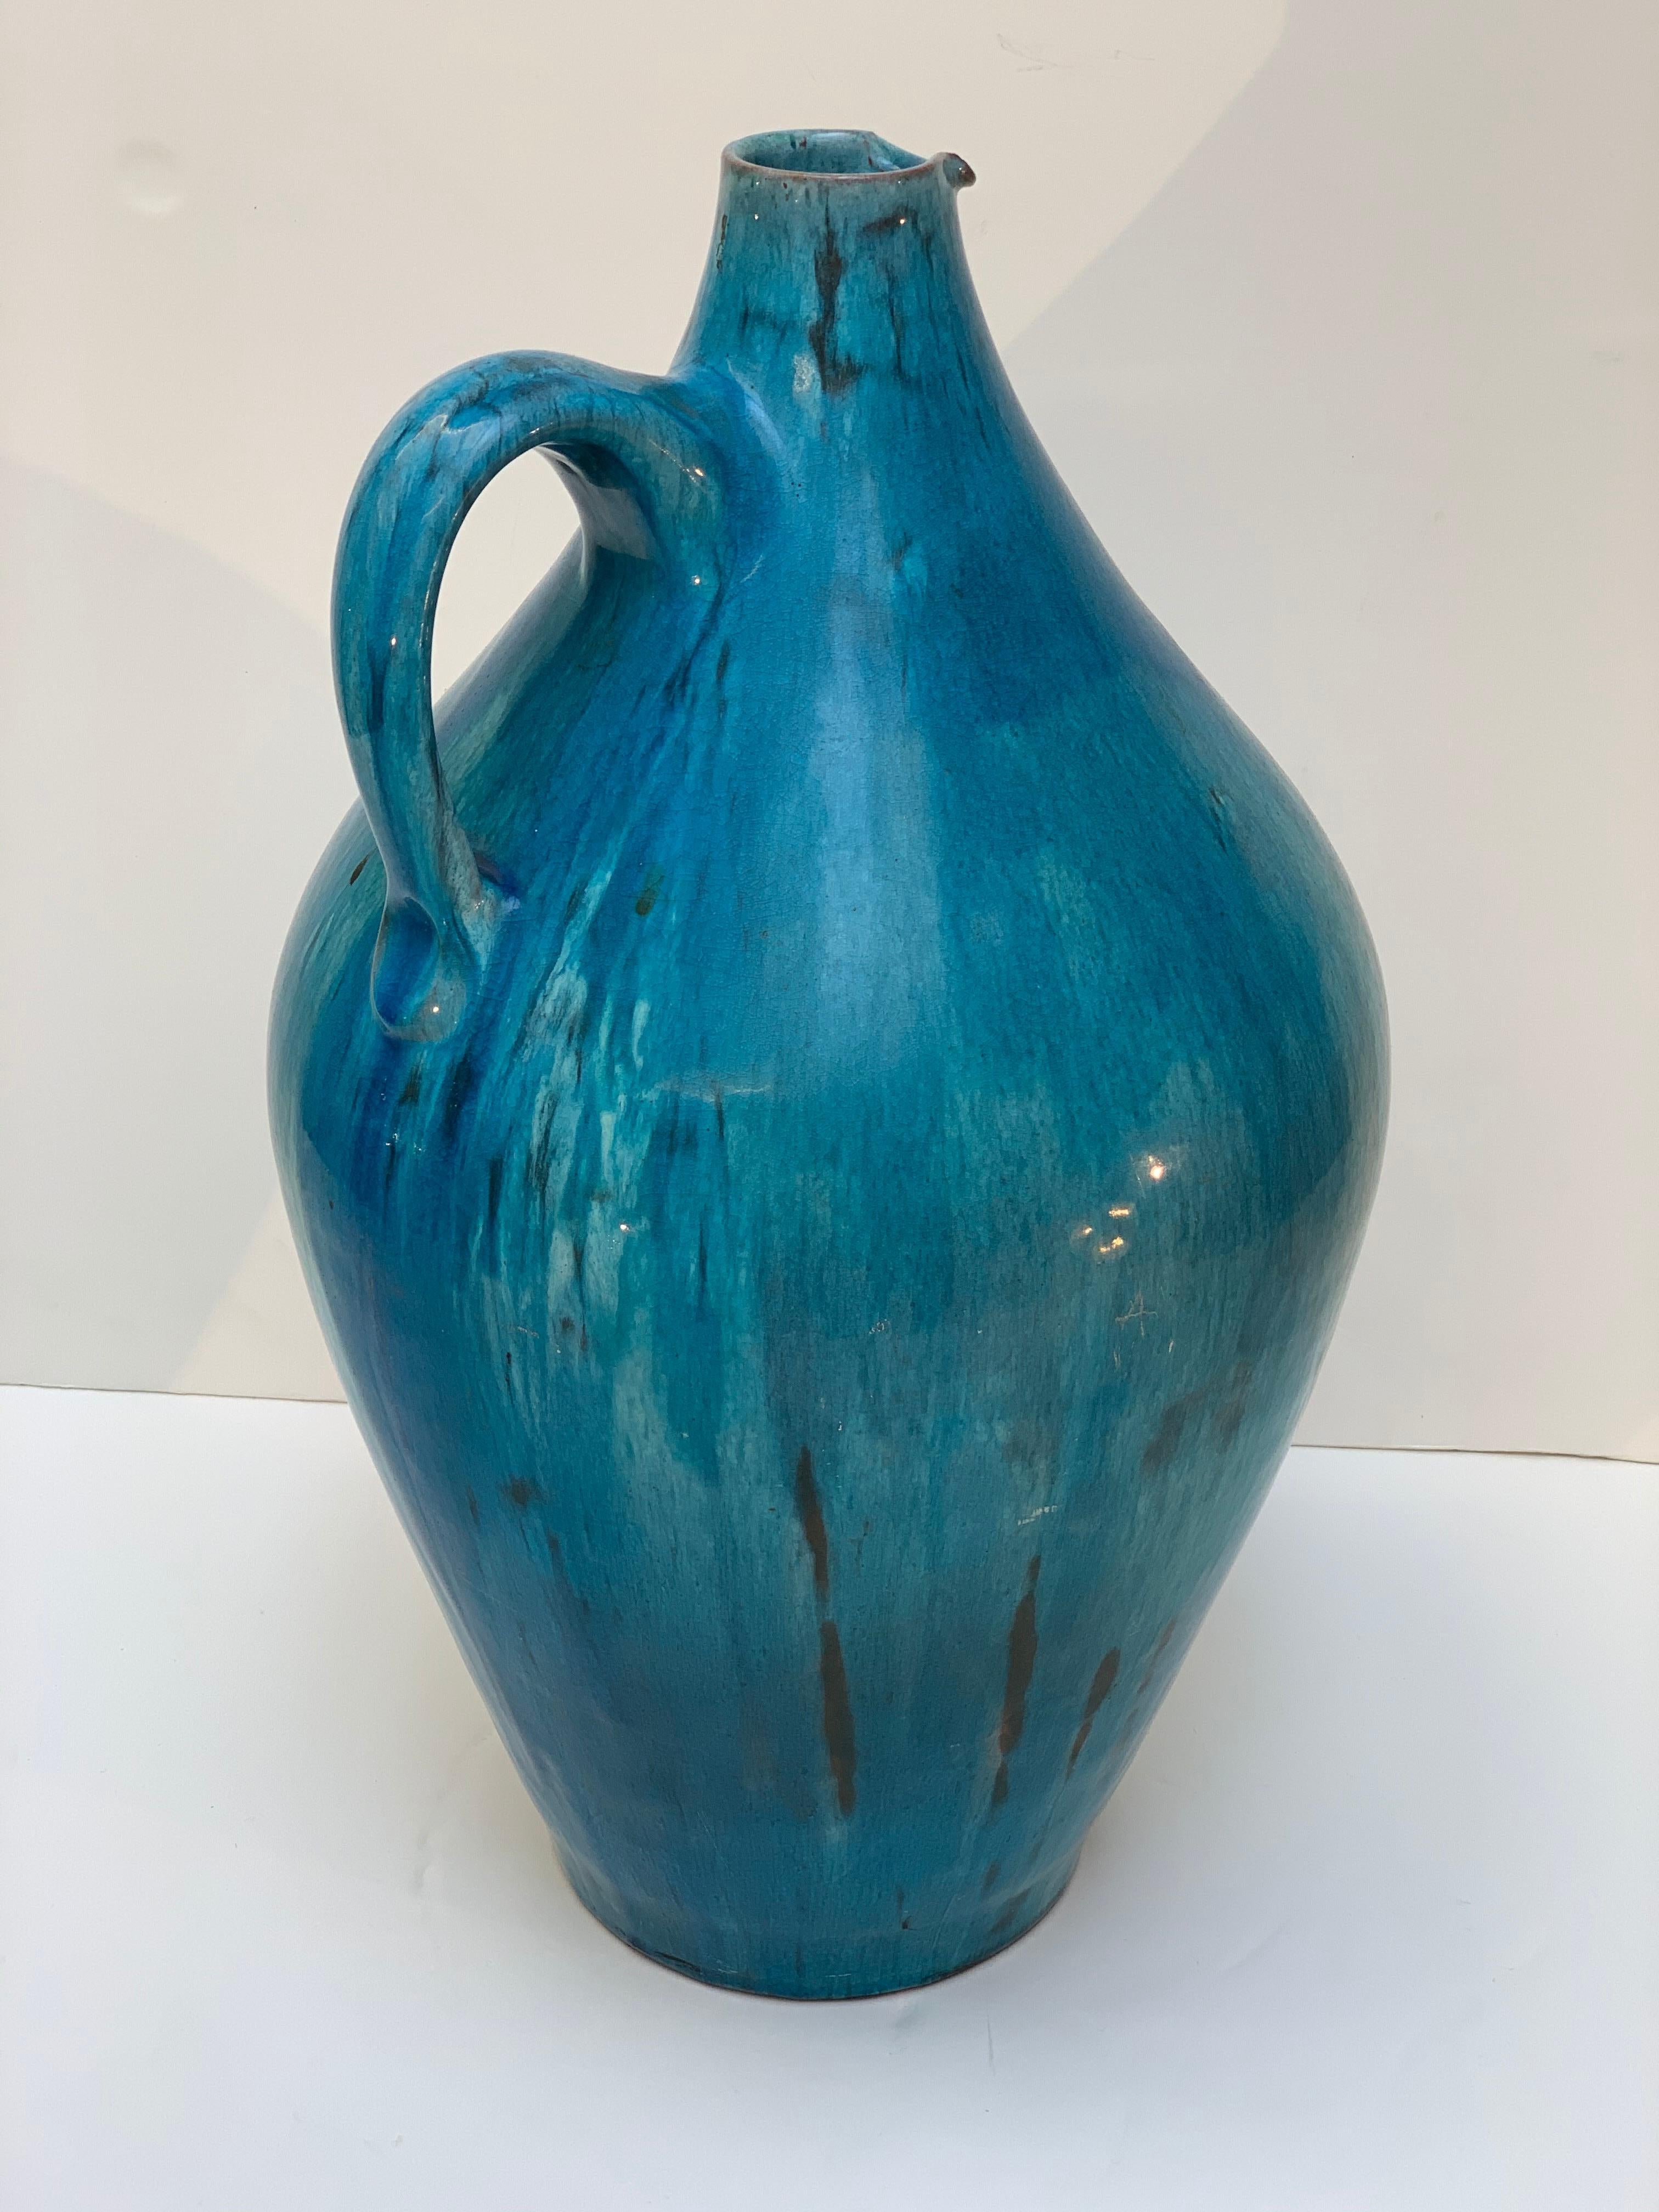 Midcentury vase in the shape of a jug with handle, beautiful color and enamel with light dripping, made by the master ceramist Marcello Fantoni in Florence Italy in the 1950s.
Signed Fantoni Italy under the base.
  